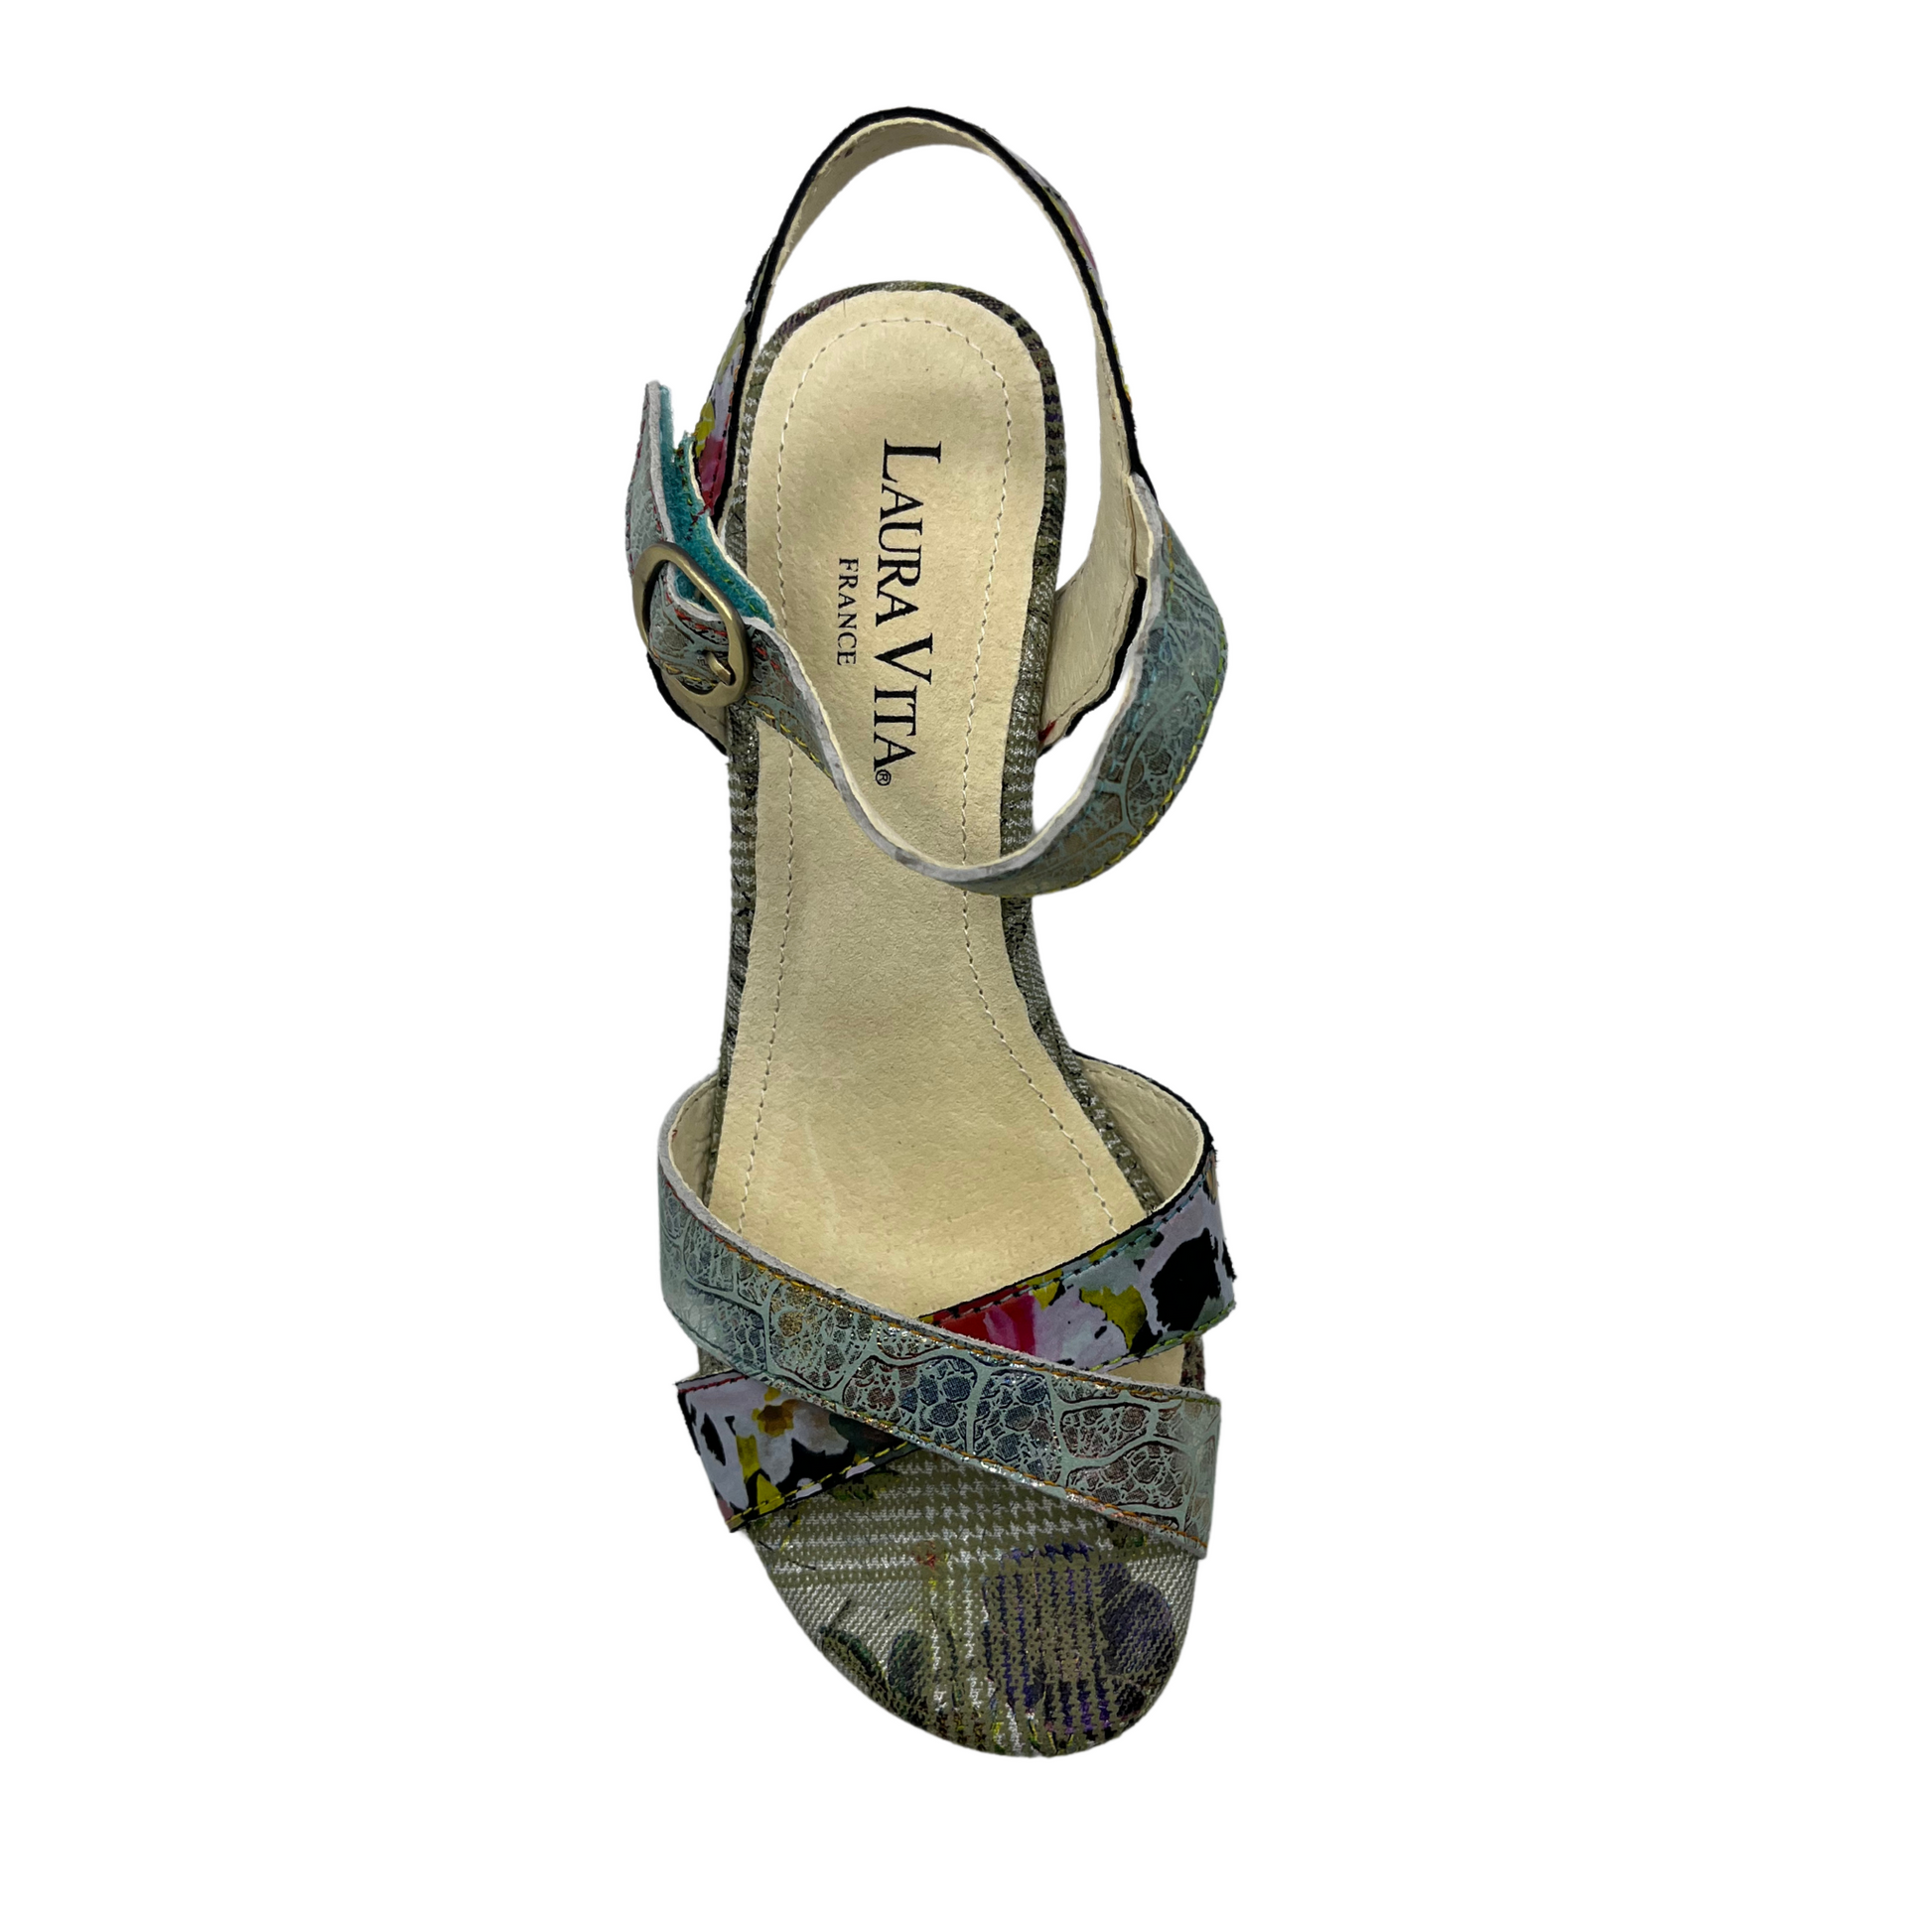 Top view of patterned leather sandal with buckle ankle strap, crossed straps on toe and block lucite heel